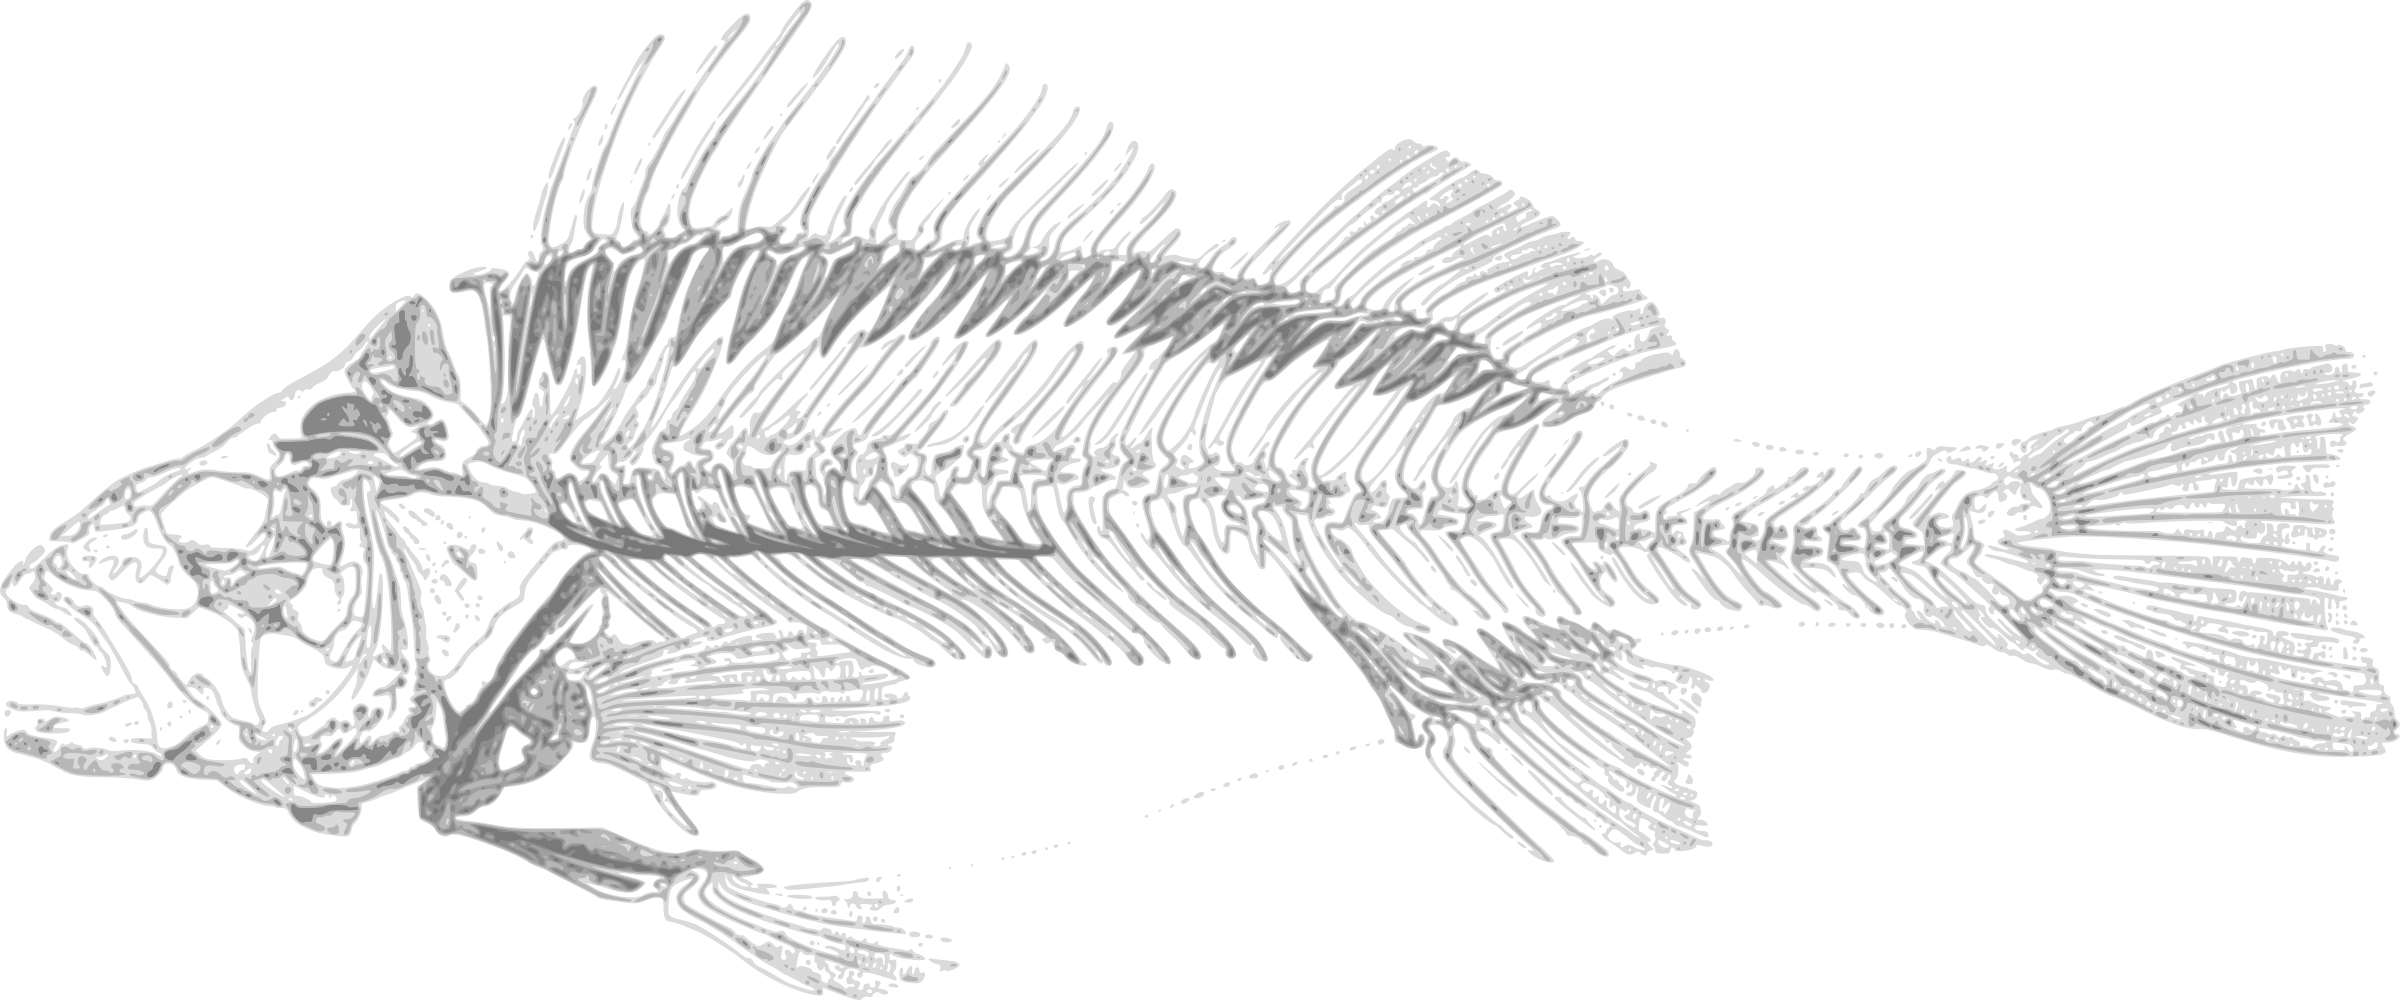 Fish Skeleton Sketch at Explore collection of Fish